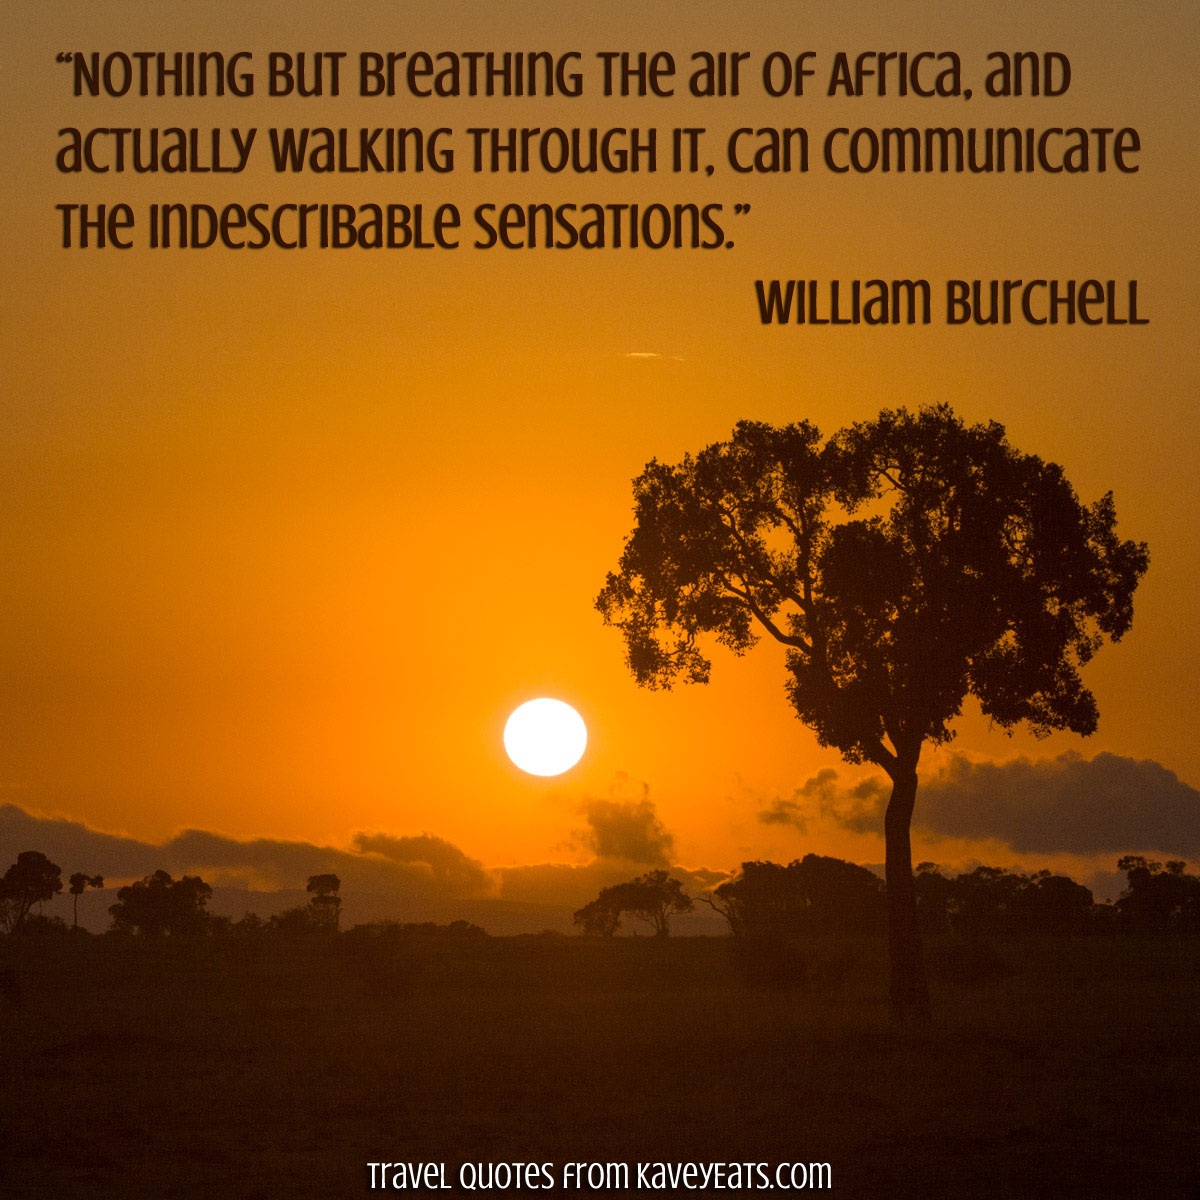 "Nothing but breathing the air of Africa, and actually walking through it, can communicate the indescribable sensations." ~ William Burchell